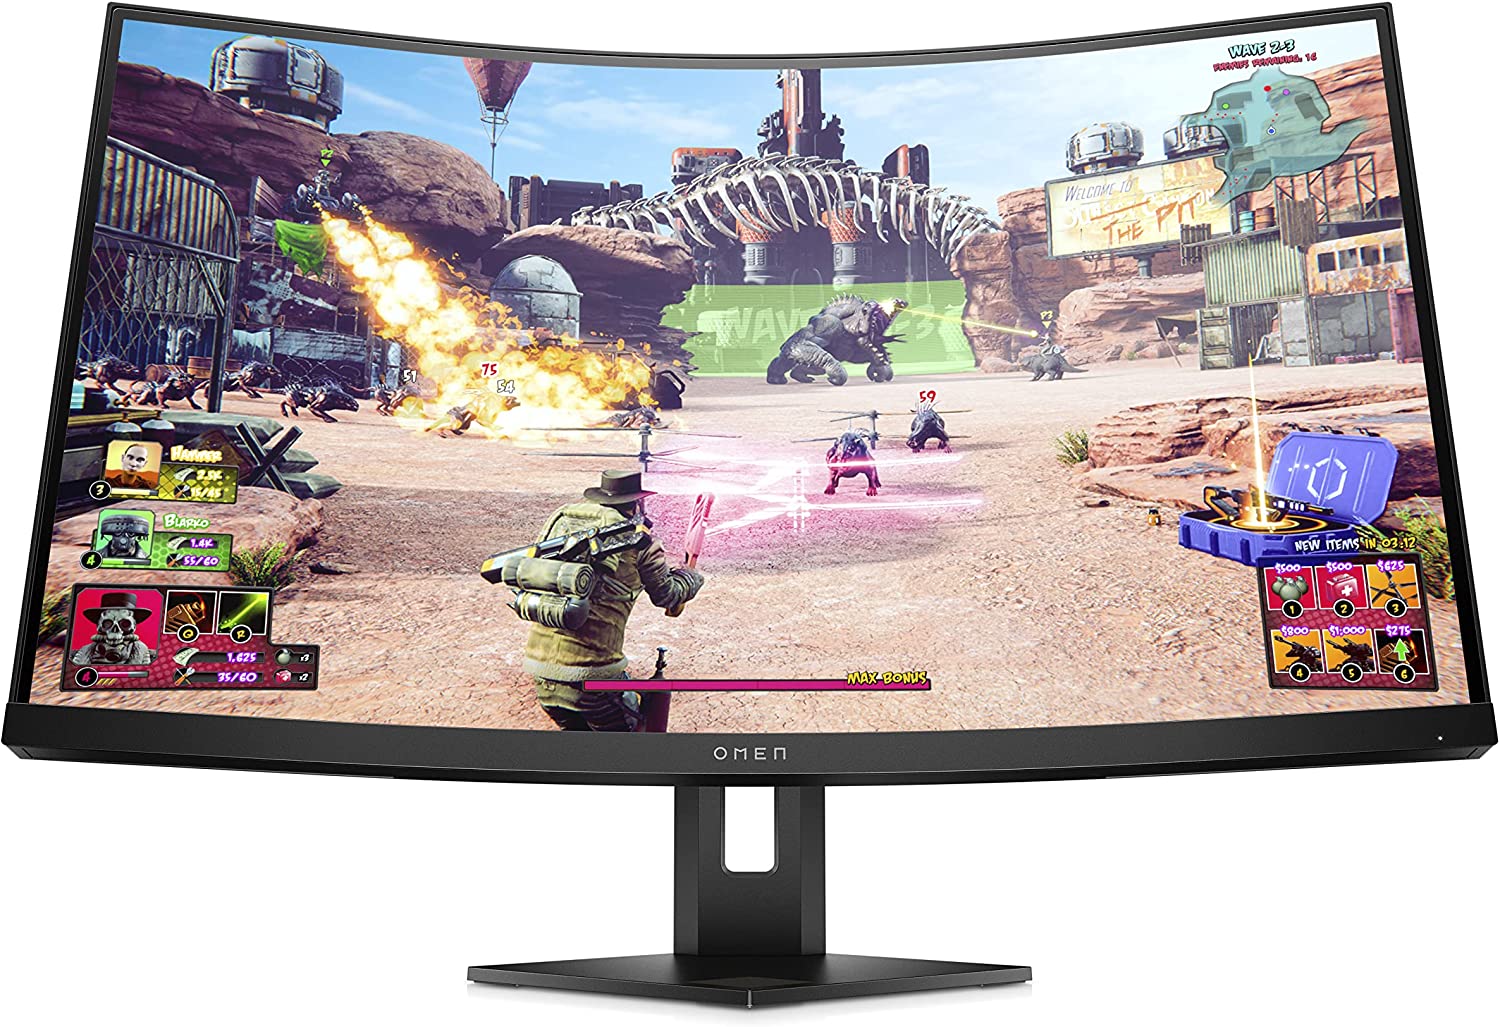 HP has announced the OMEN 27c gaming monitor, which features a curved 240Hz screen